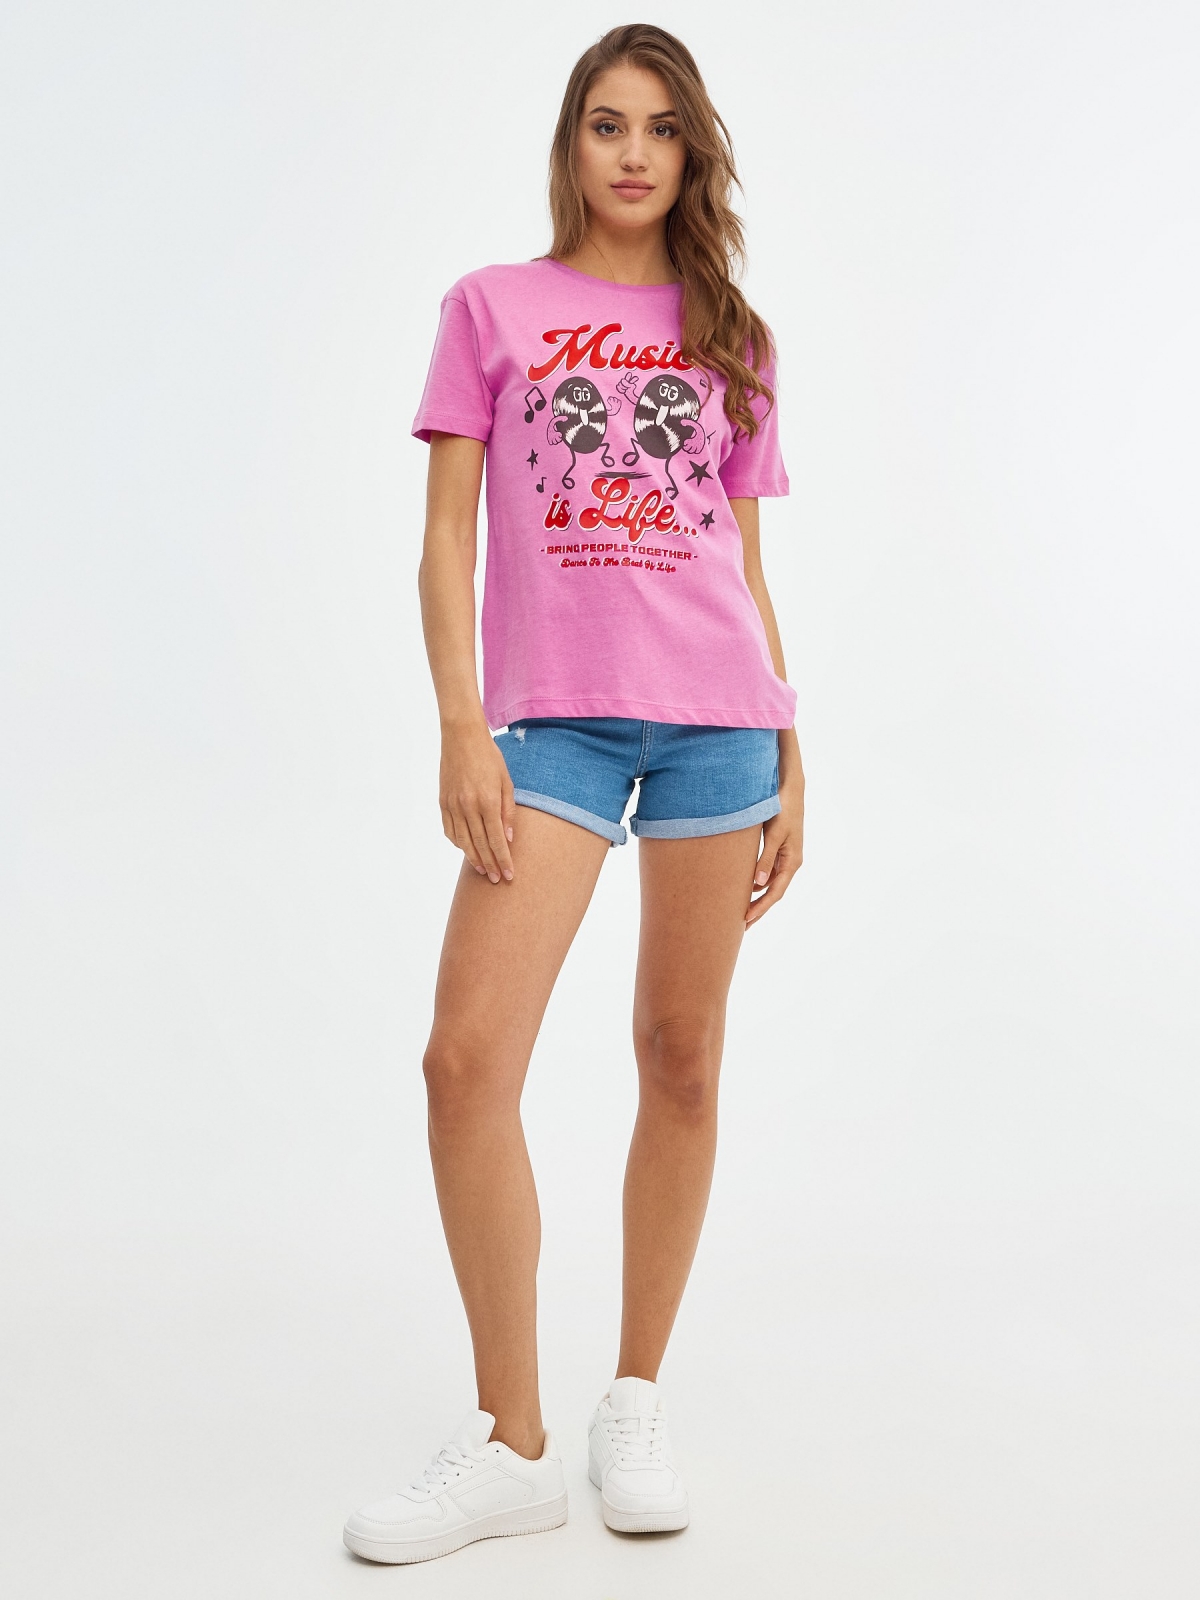 Oversized Music T-shirt pink front view